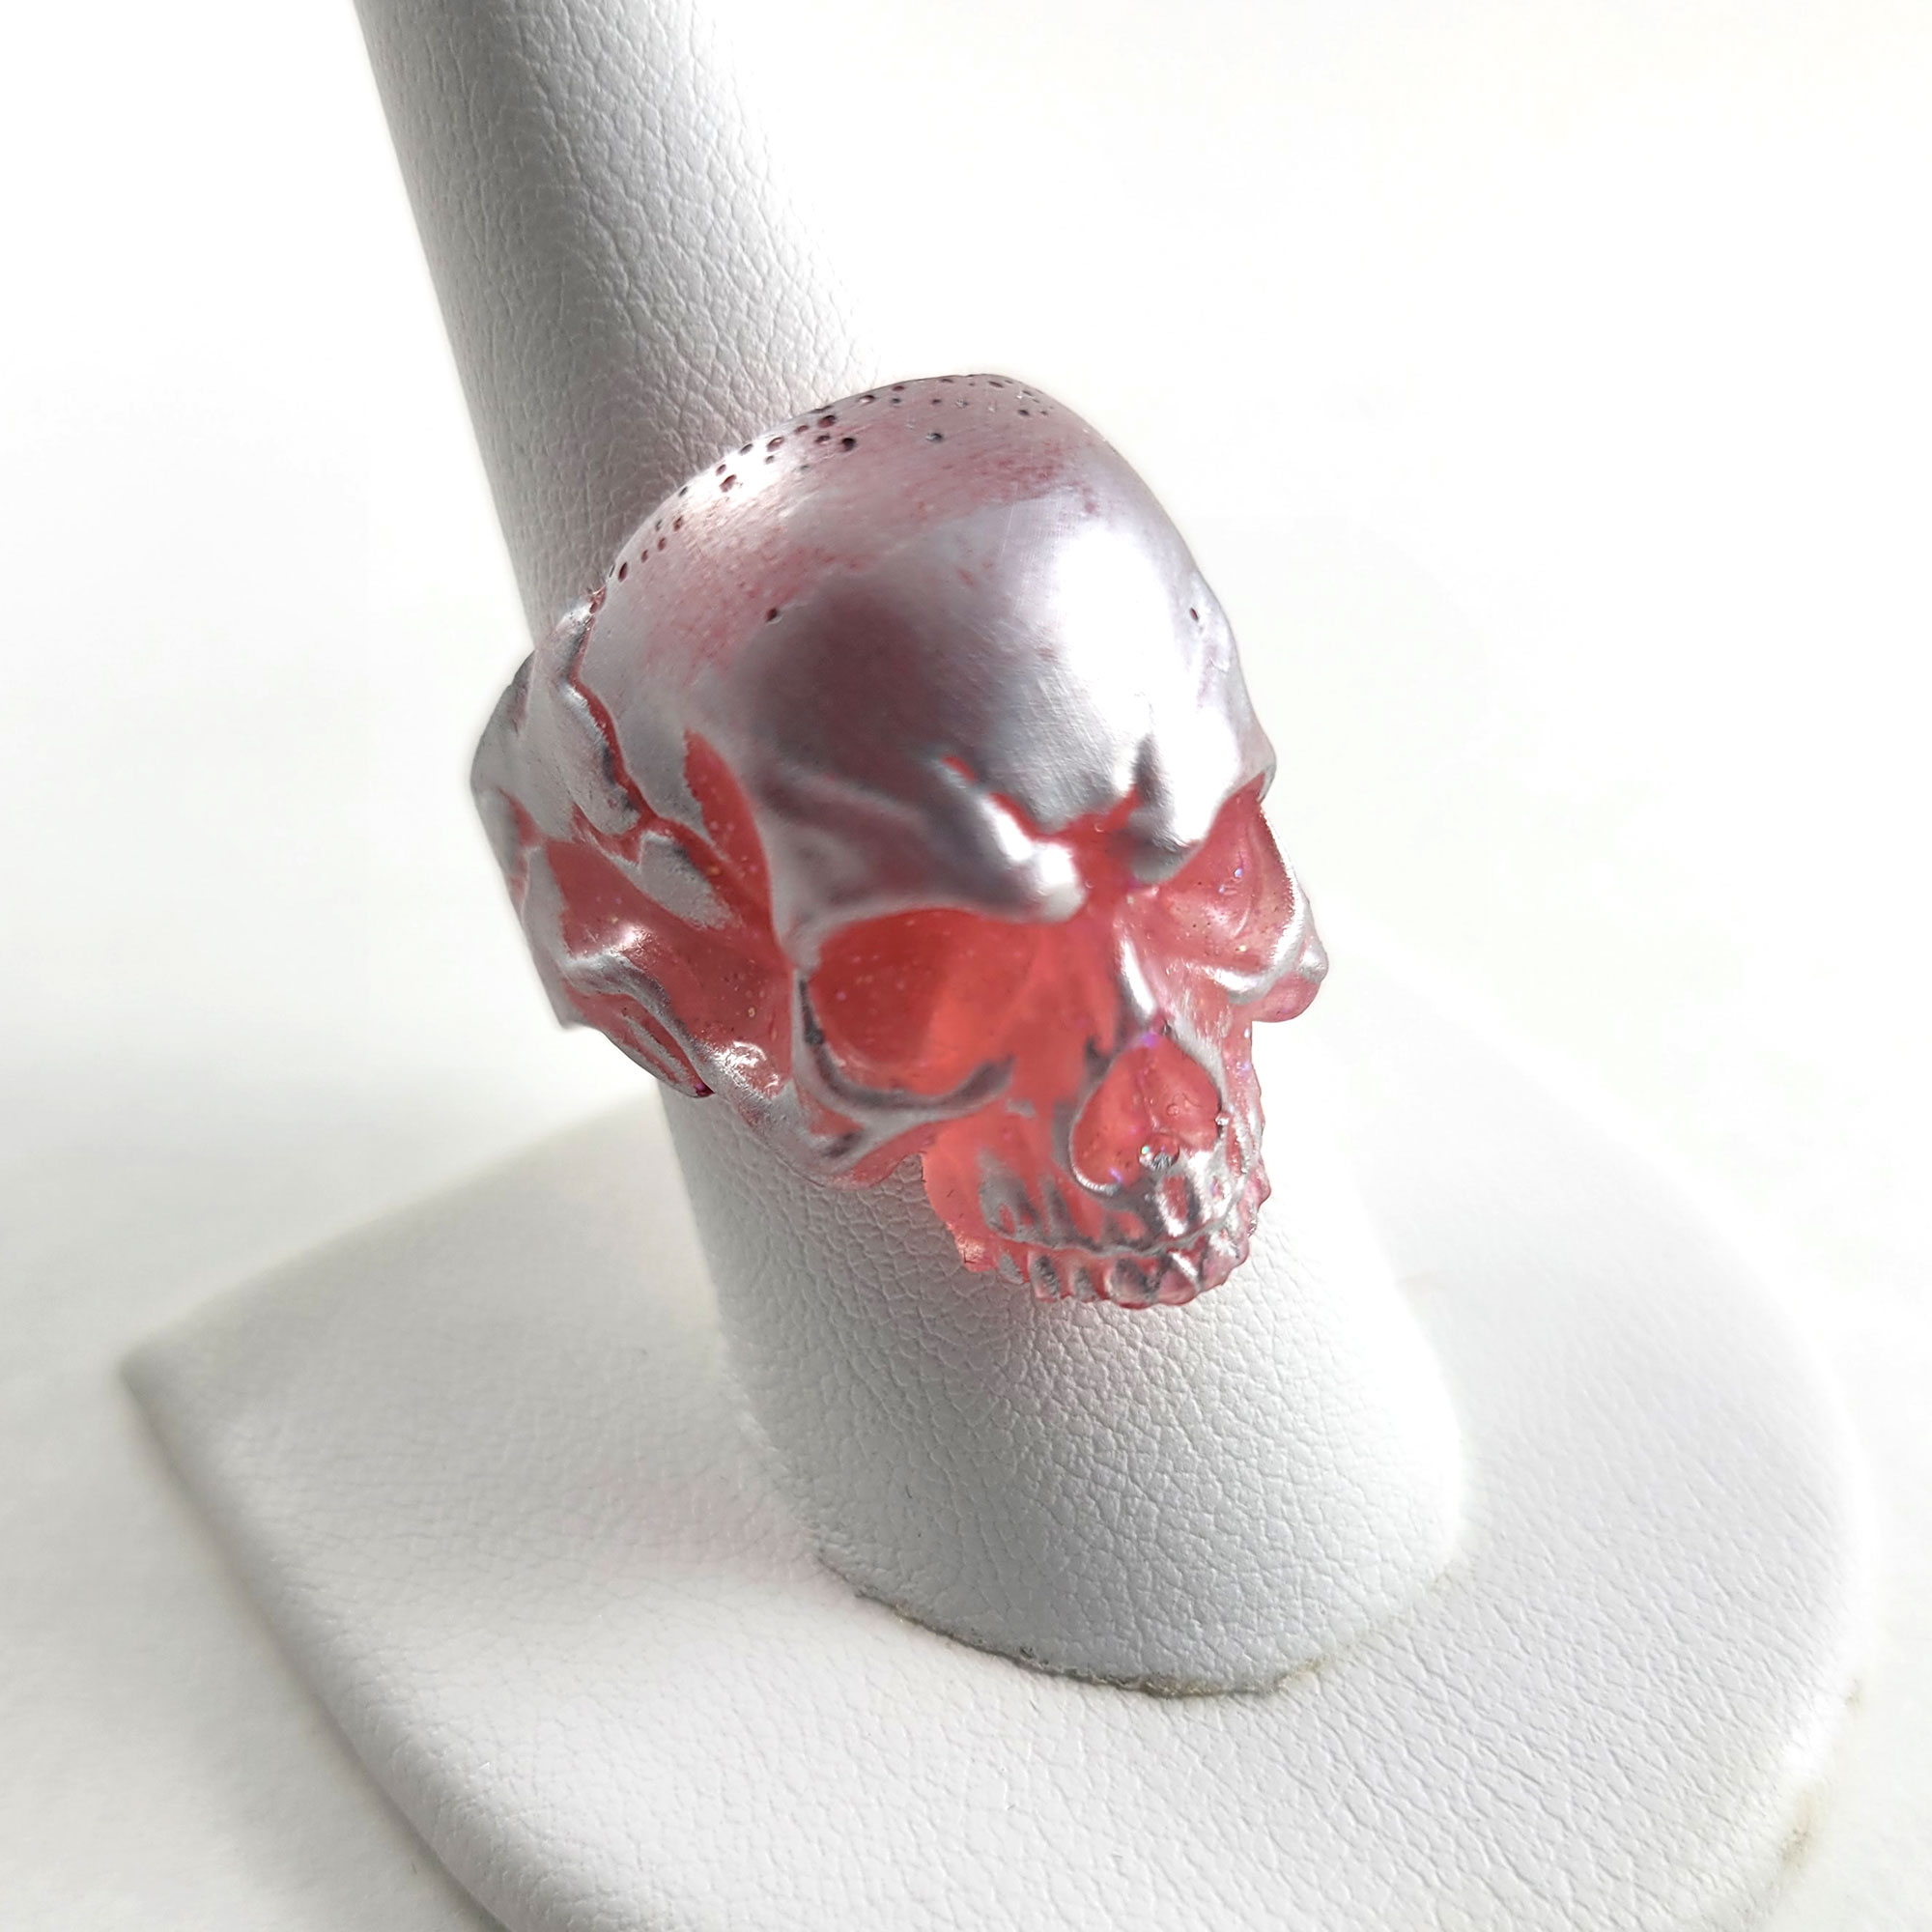 Chunky Skull Ring by Wilde Designs